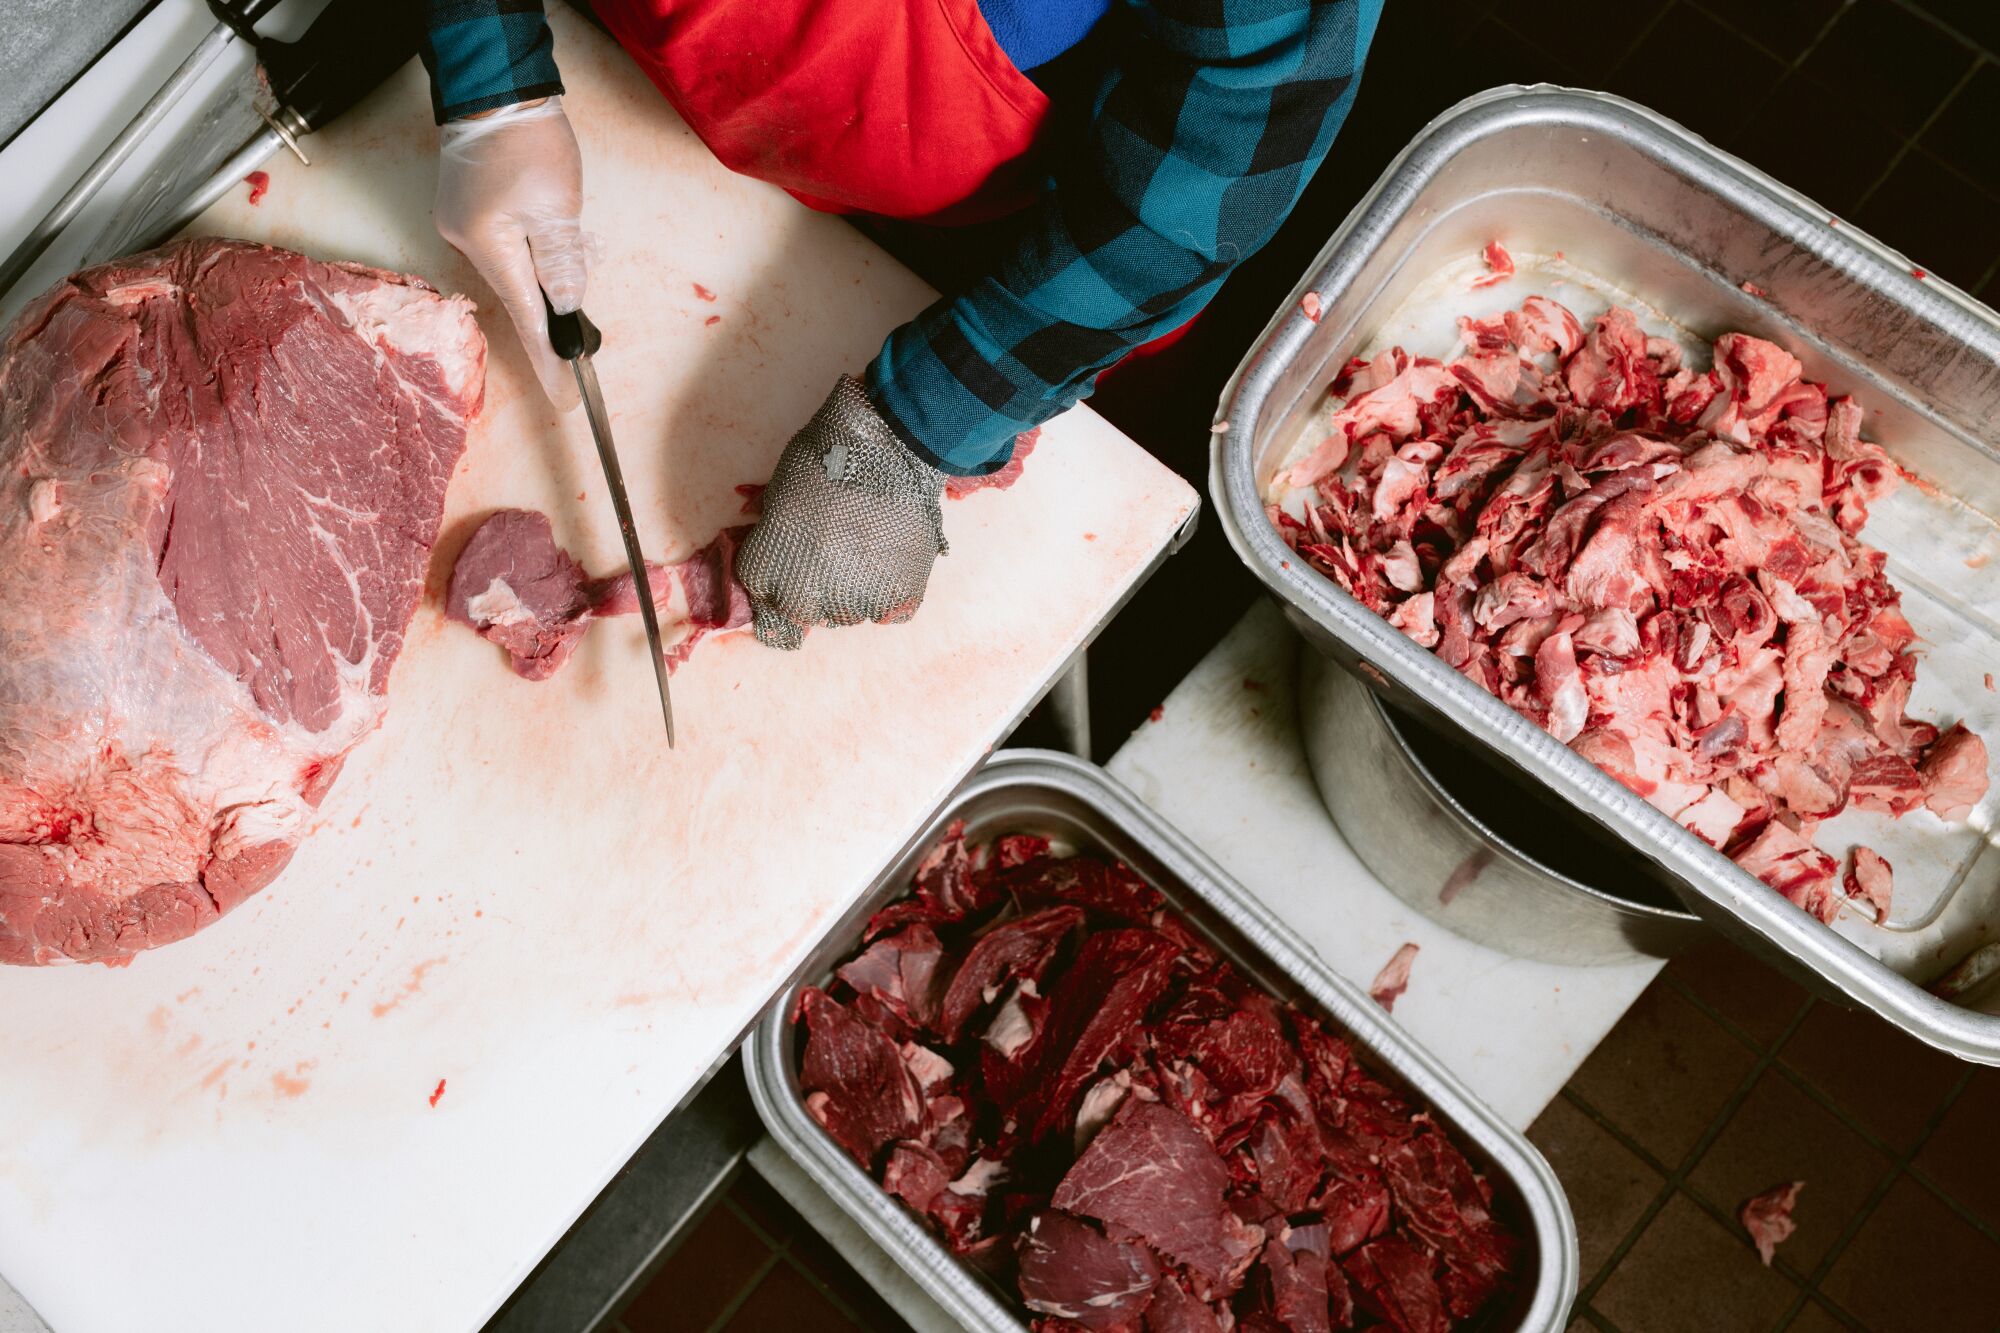 An overhead photo of a man's hands cutting slabs of meat.